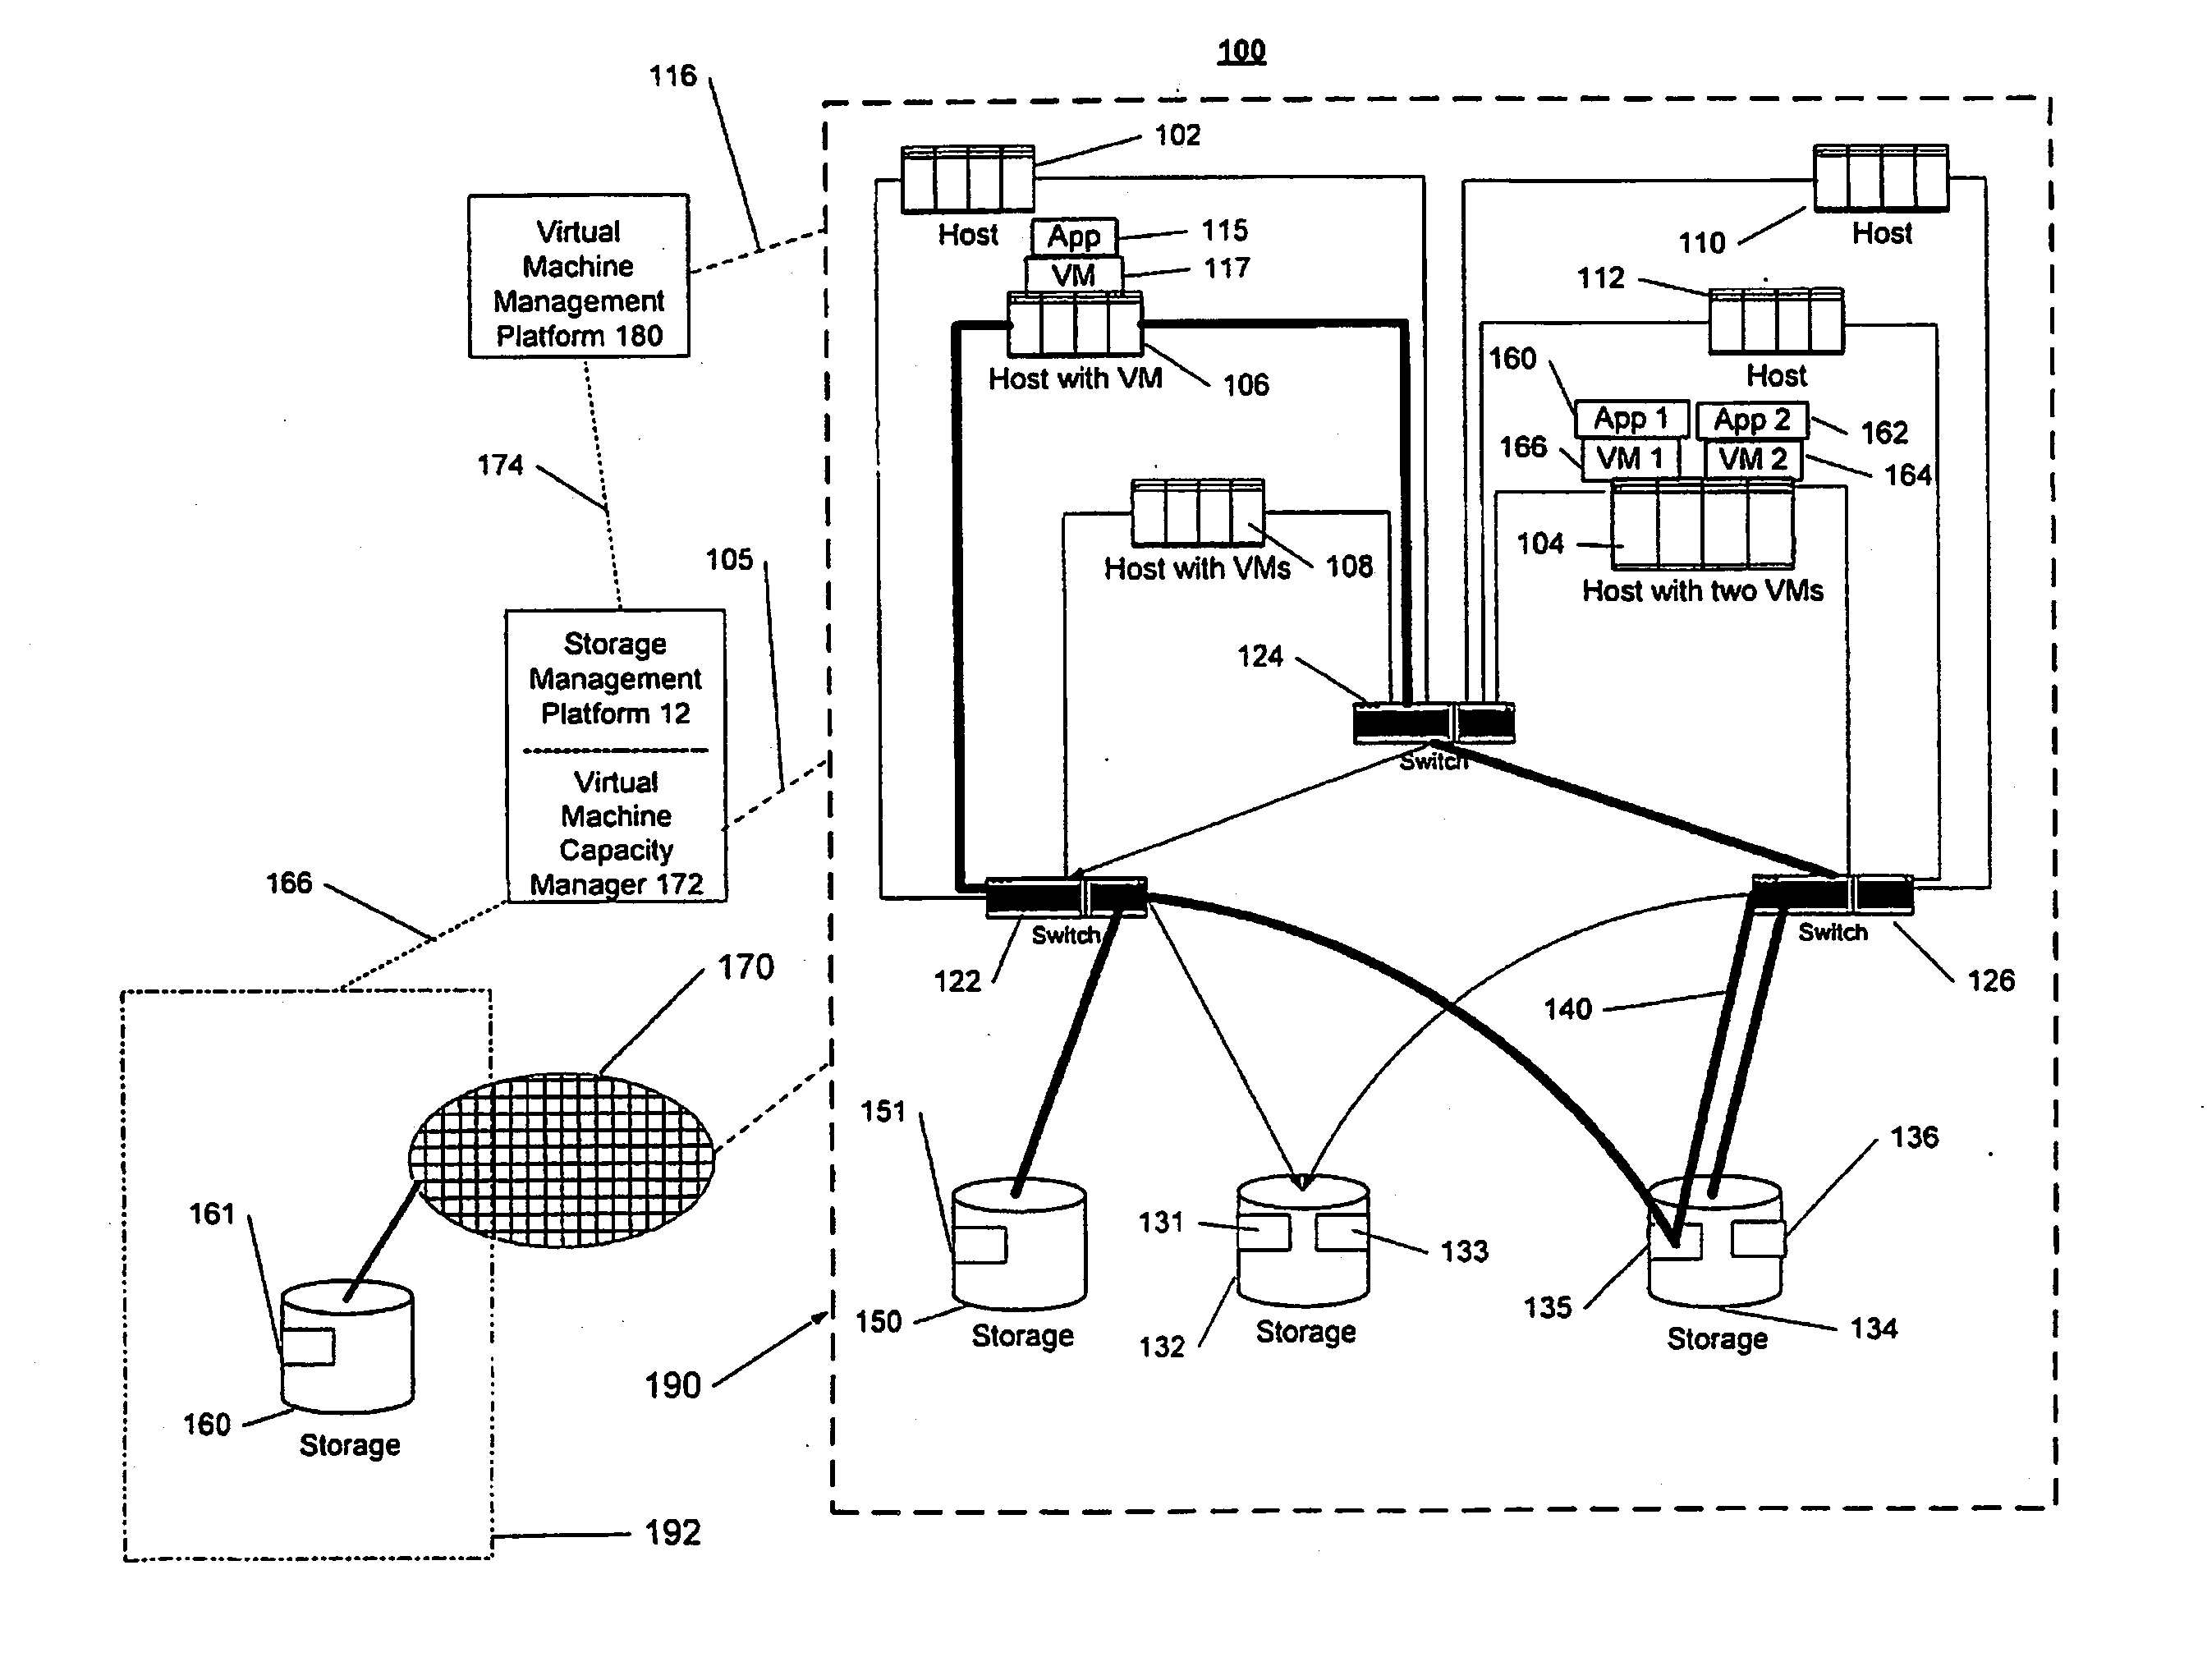 Systems and methods for path-based management of virtual servers in storage network environments